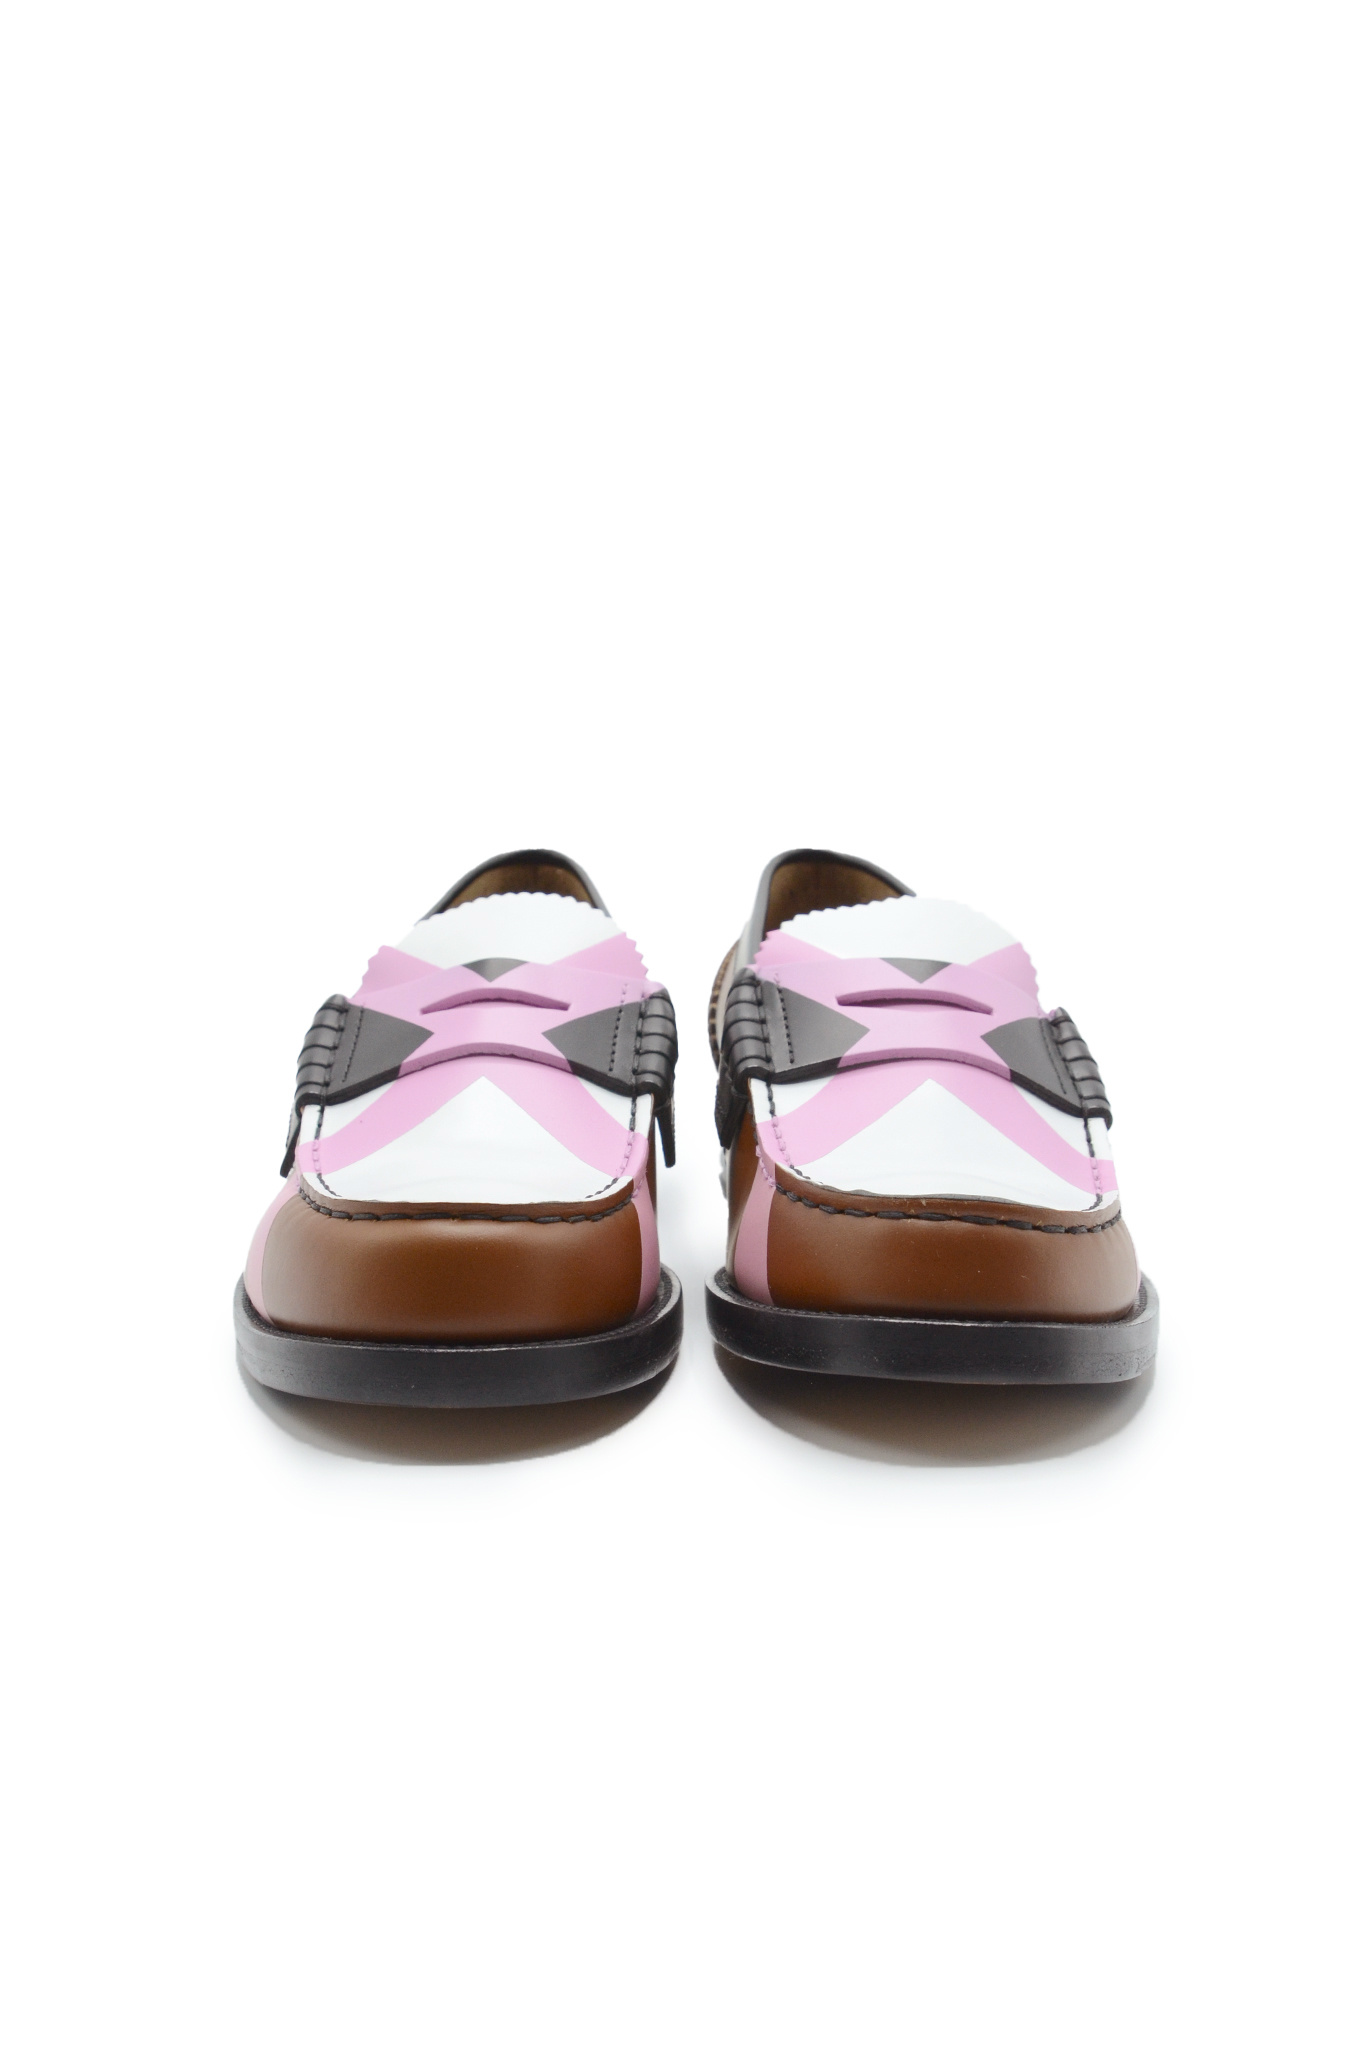 PENNY LOAFER IN TAN X PINK-4